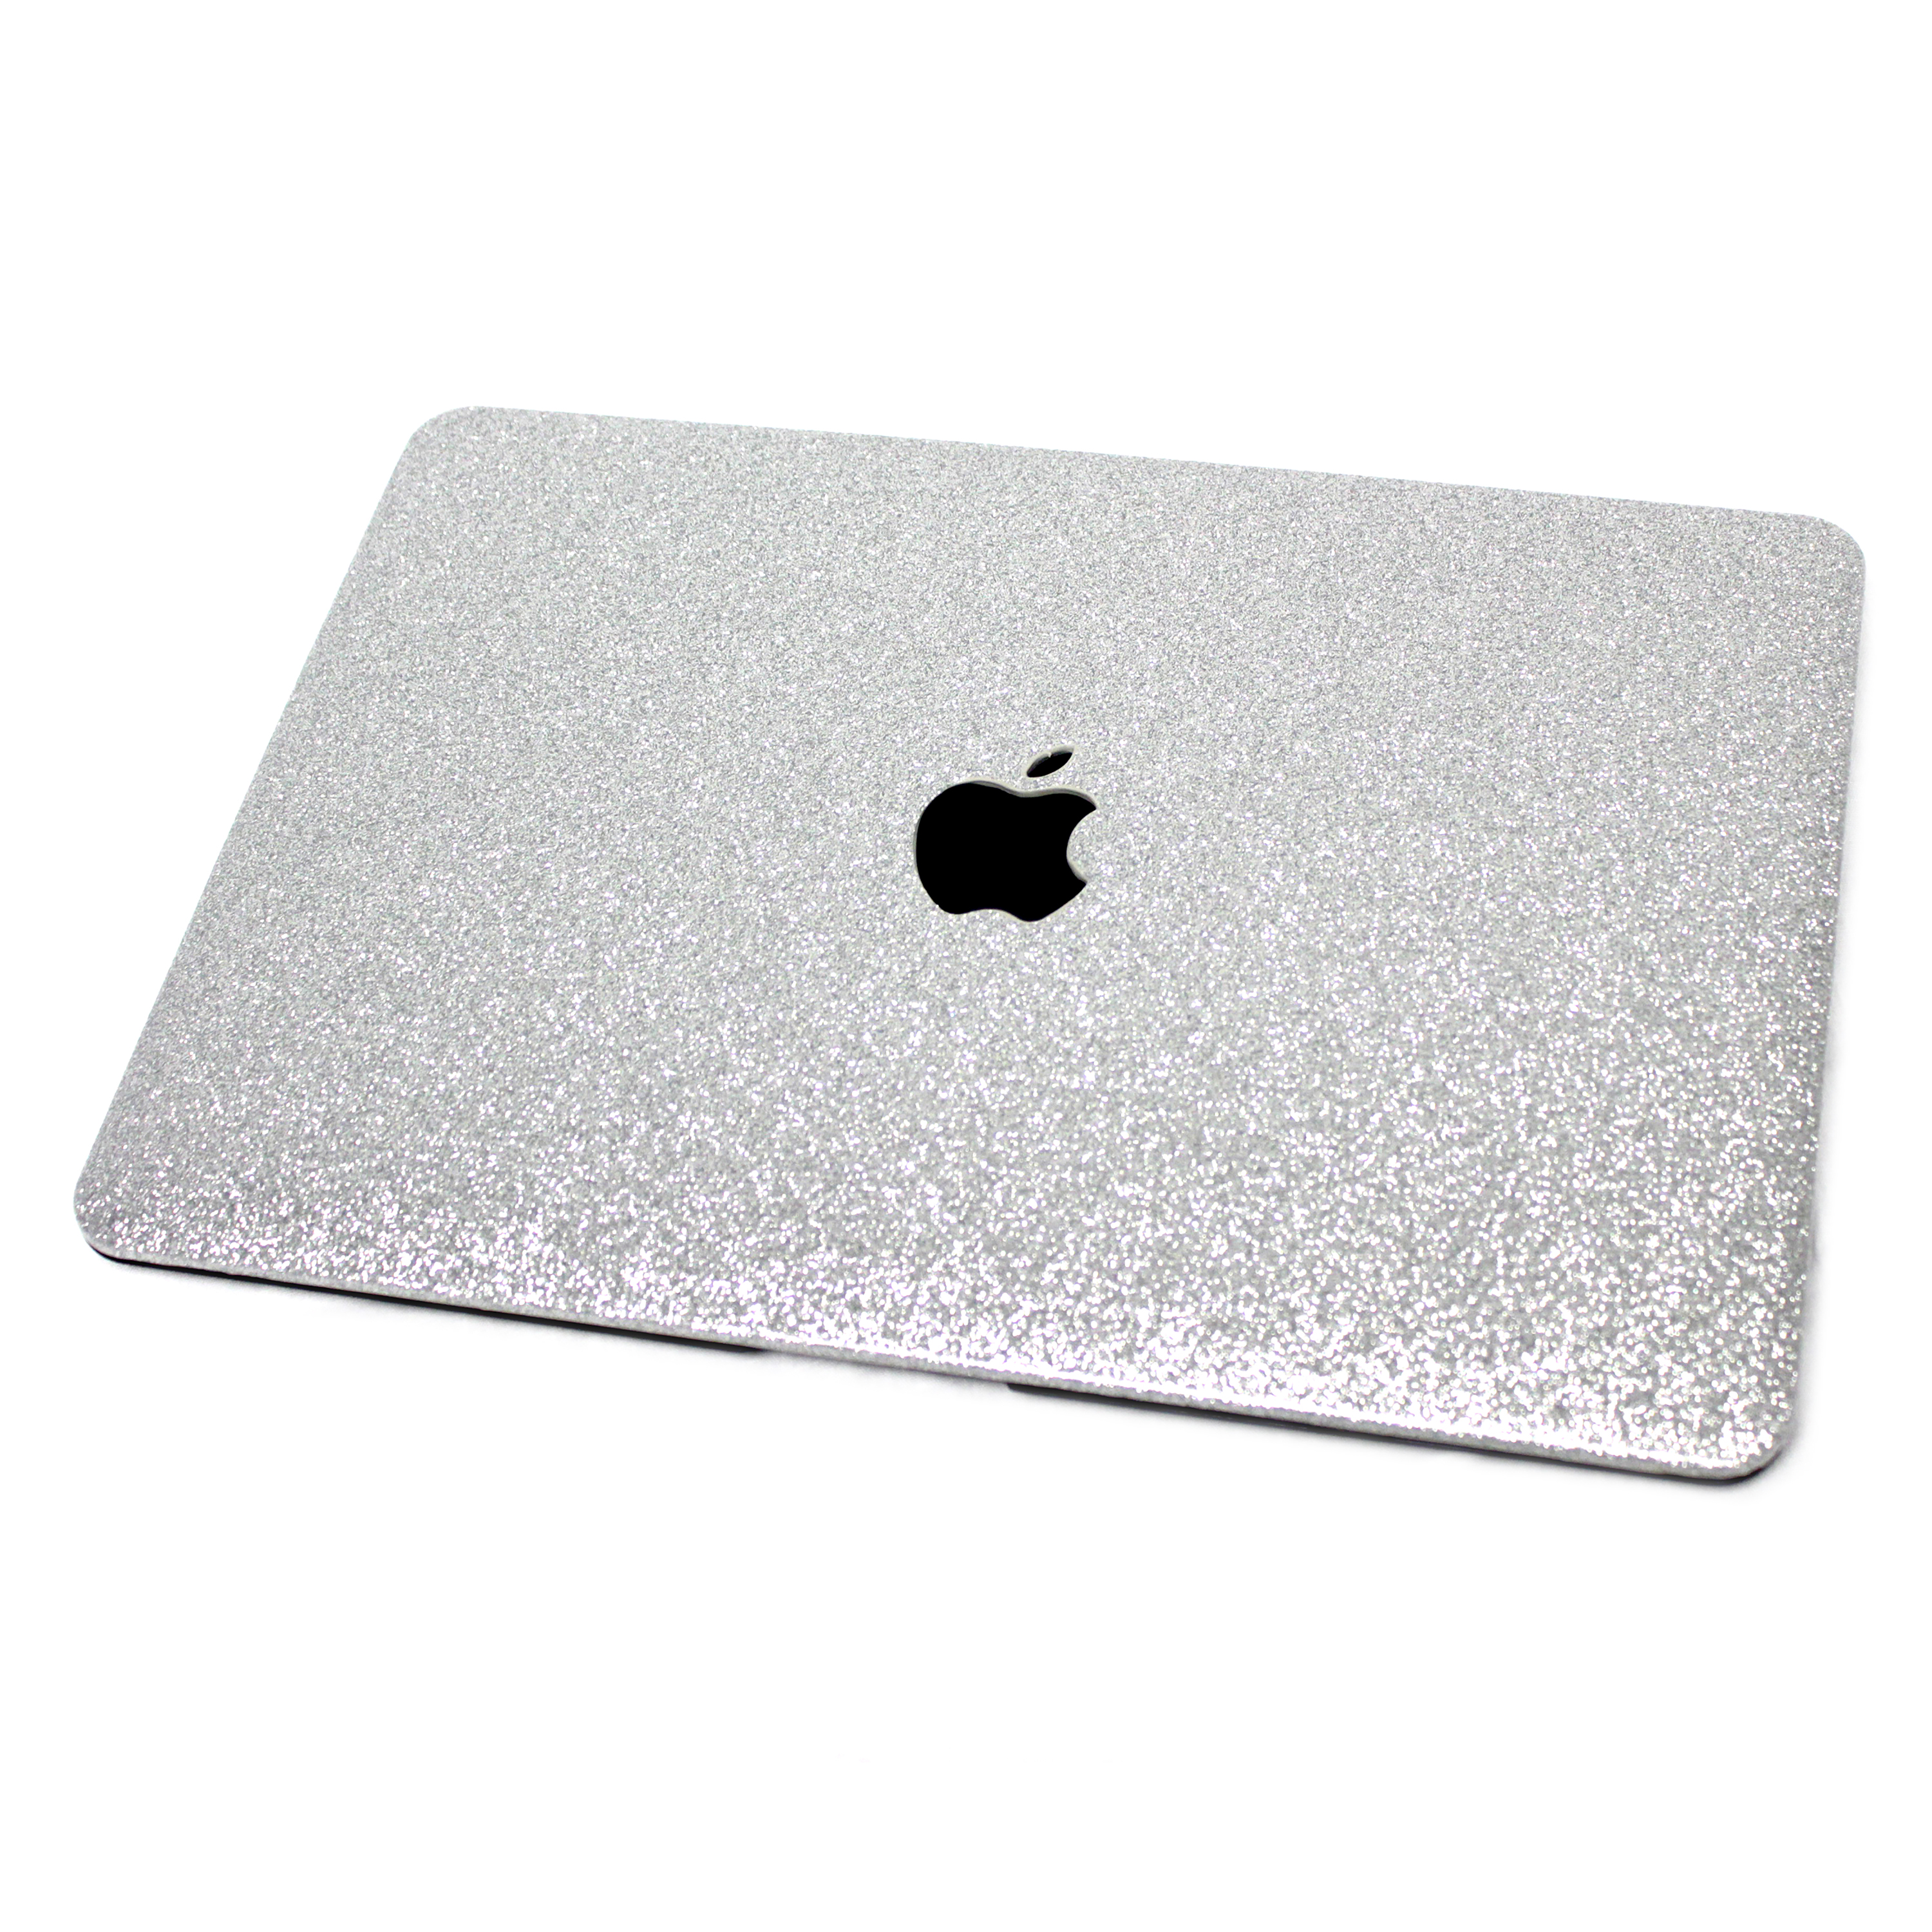 121 Protection Case Shell for MacBook Air 11” 2011 A1370 A1465 